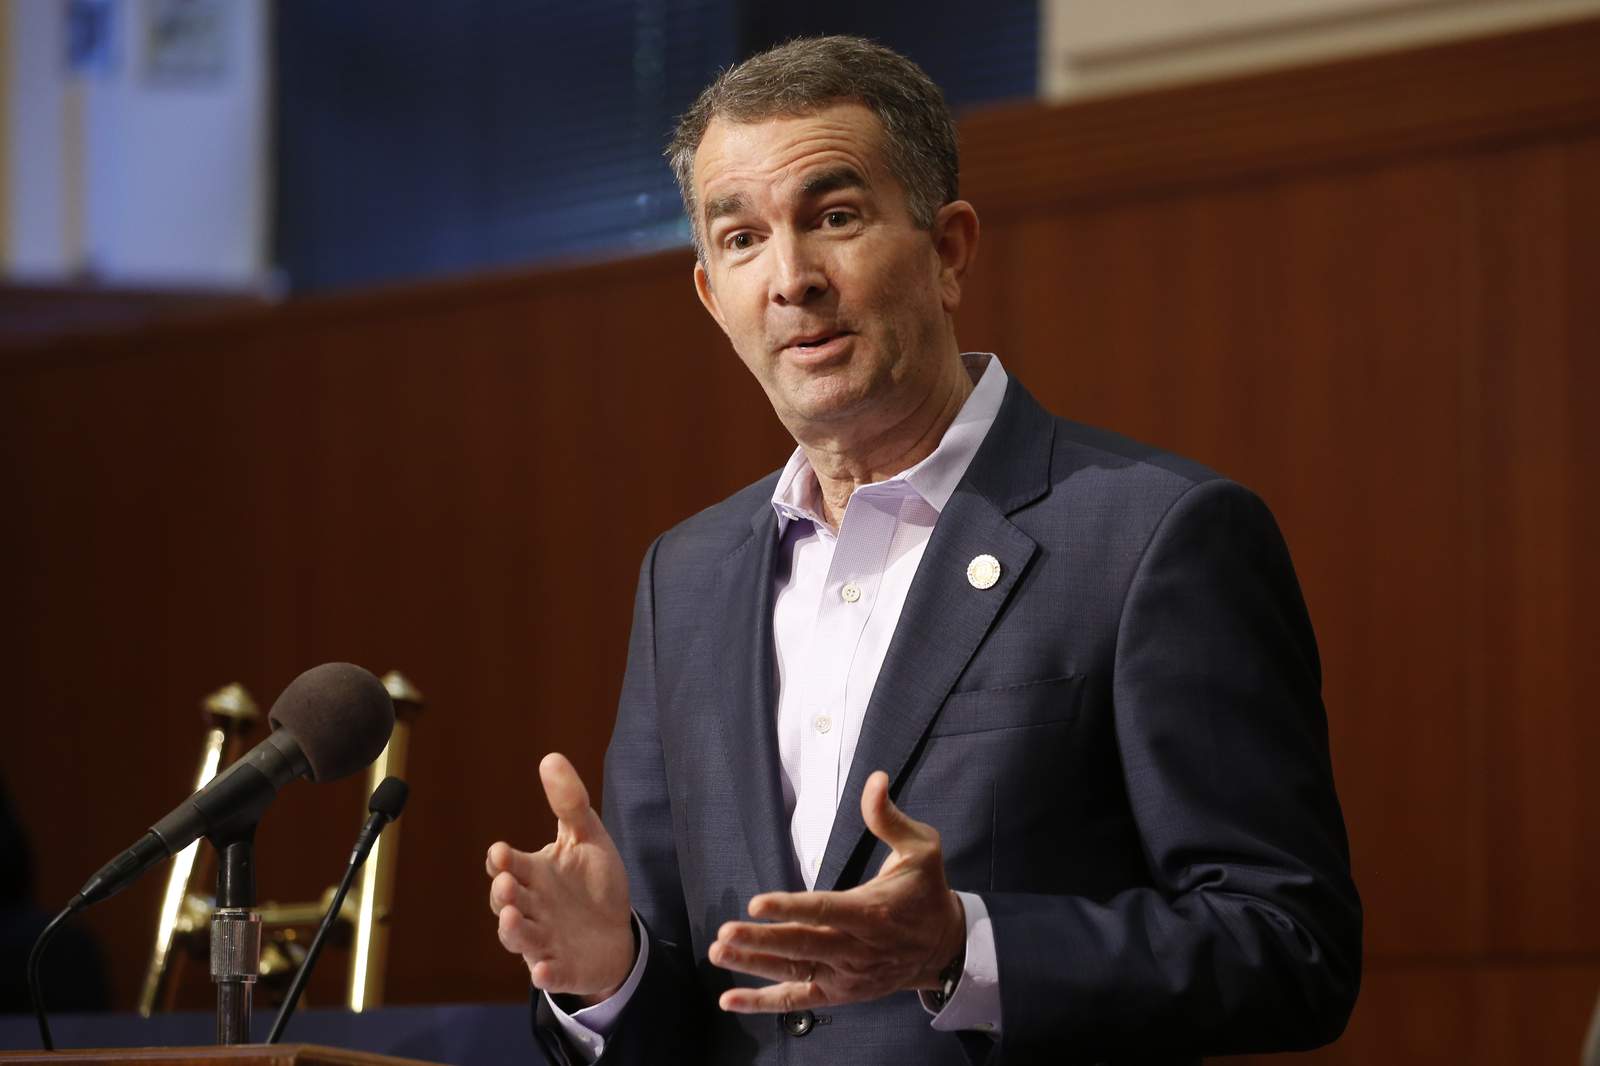 Gov. Northam seeks early release for nearly 2,000 inmates to fight spread of the coronavirus